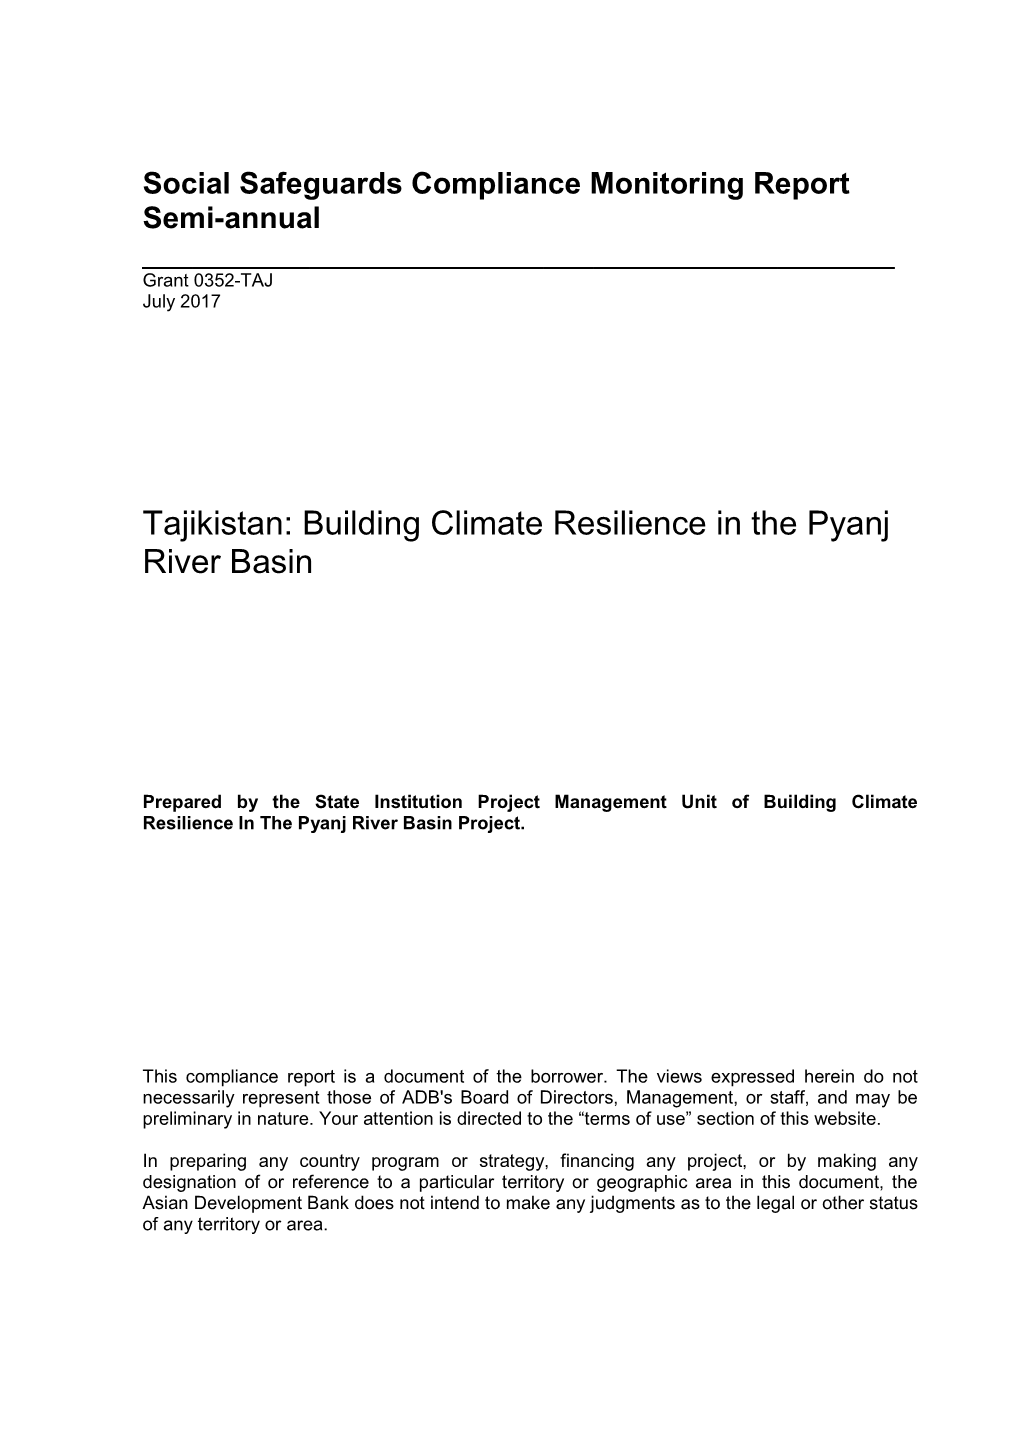 Building Climate Resilience in the Pyanj River Basin